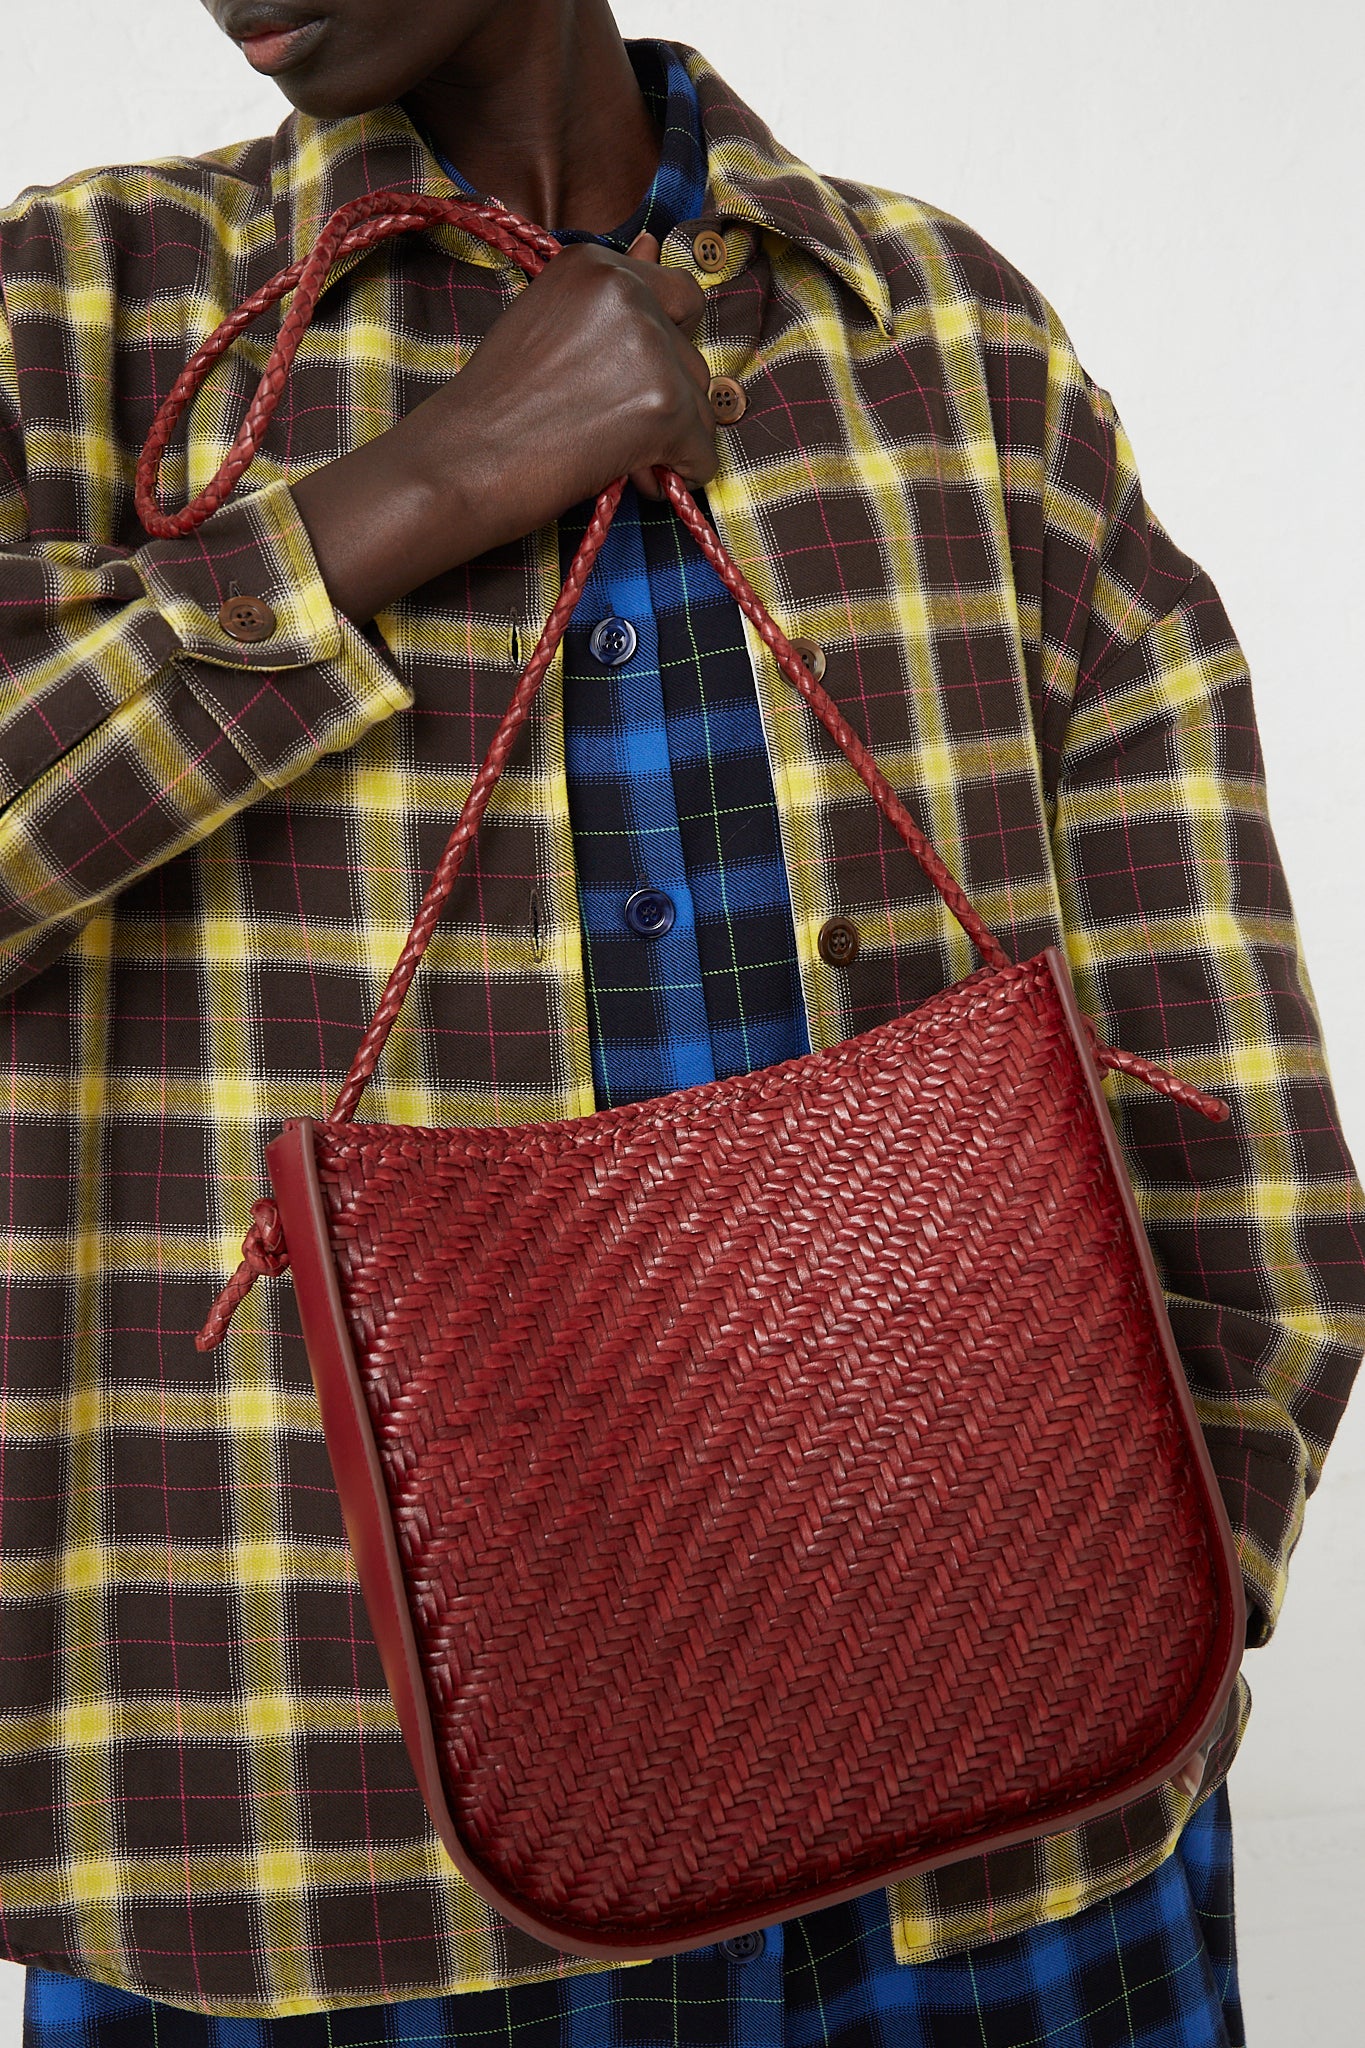 A woman in a plaid shirt is holding a Dragon Diffusion Wanaka Crossbody Bag in Bordo. Available at Oroboro Store.